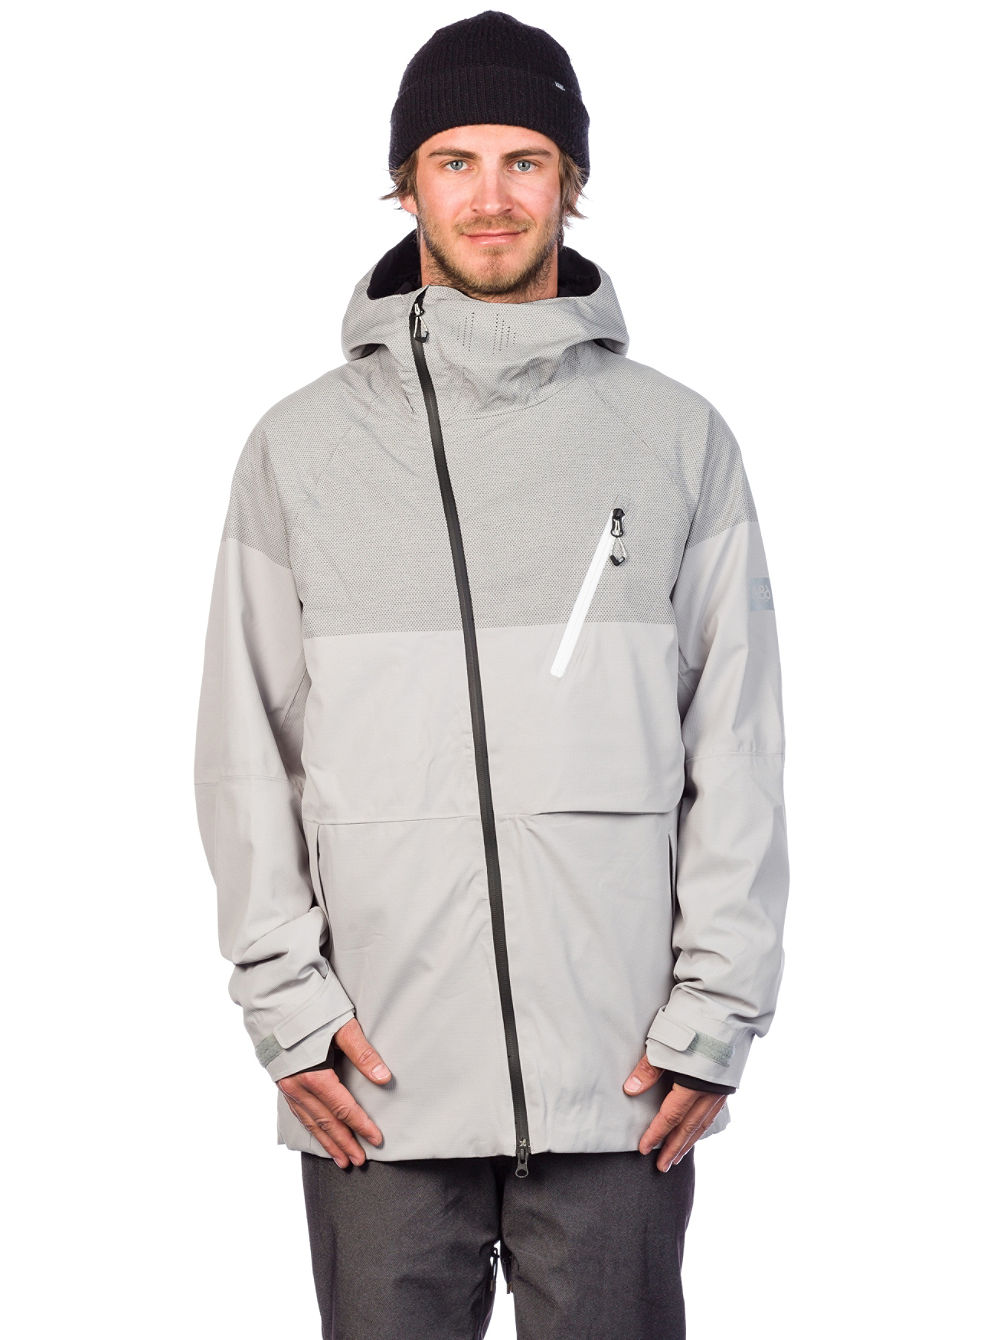 GLCR Hydra Thermagraph Veste